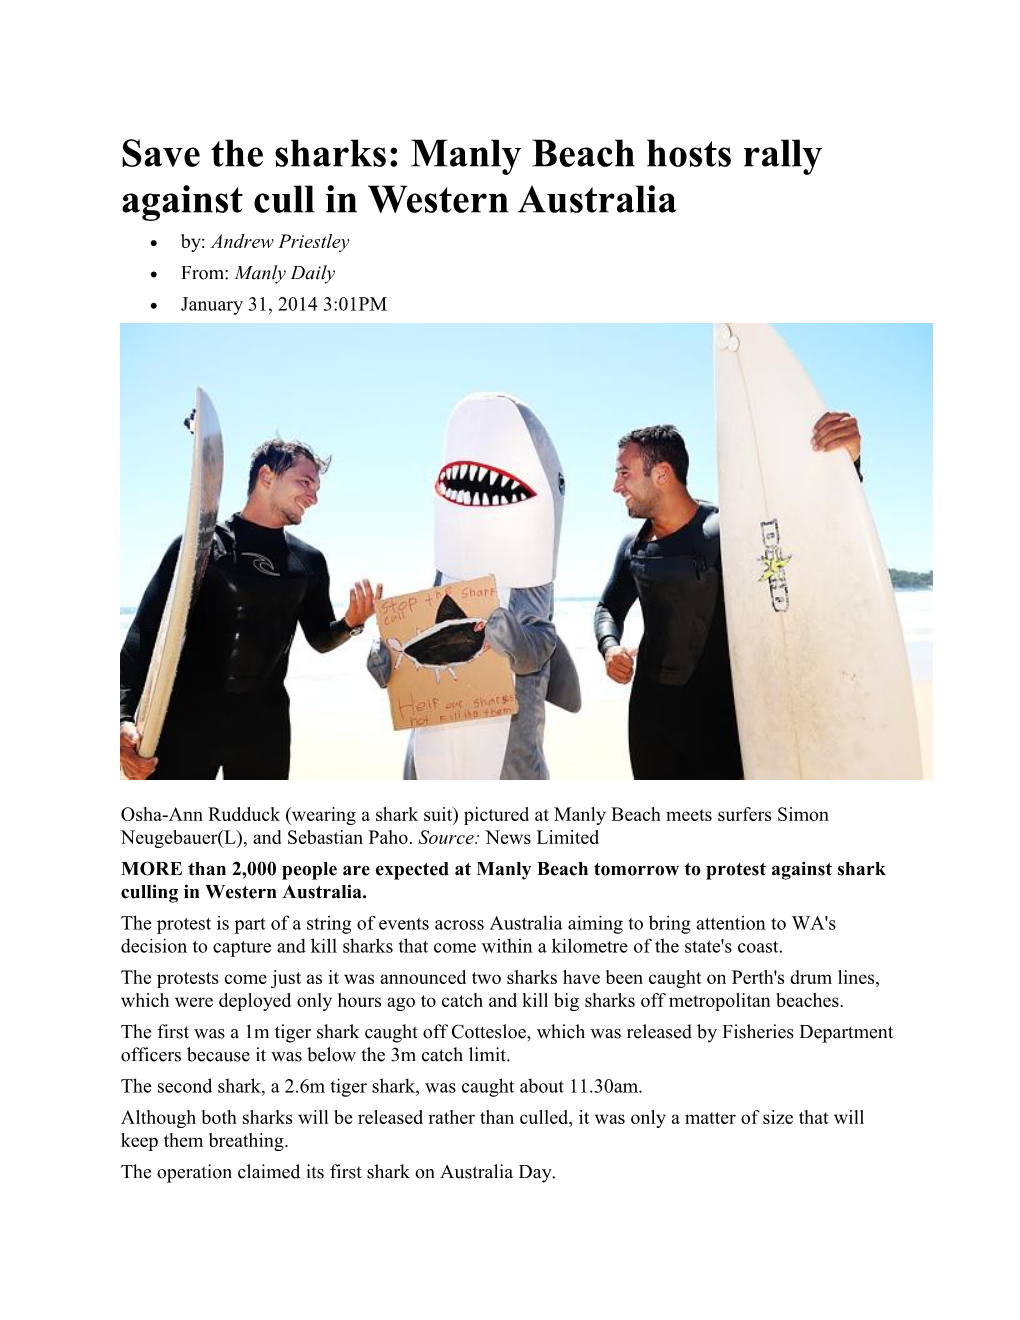 Save the Sharks: Manly Beach Hosts Rally Against Cull in Western Australia